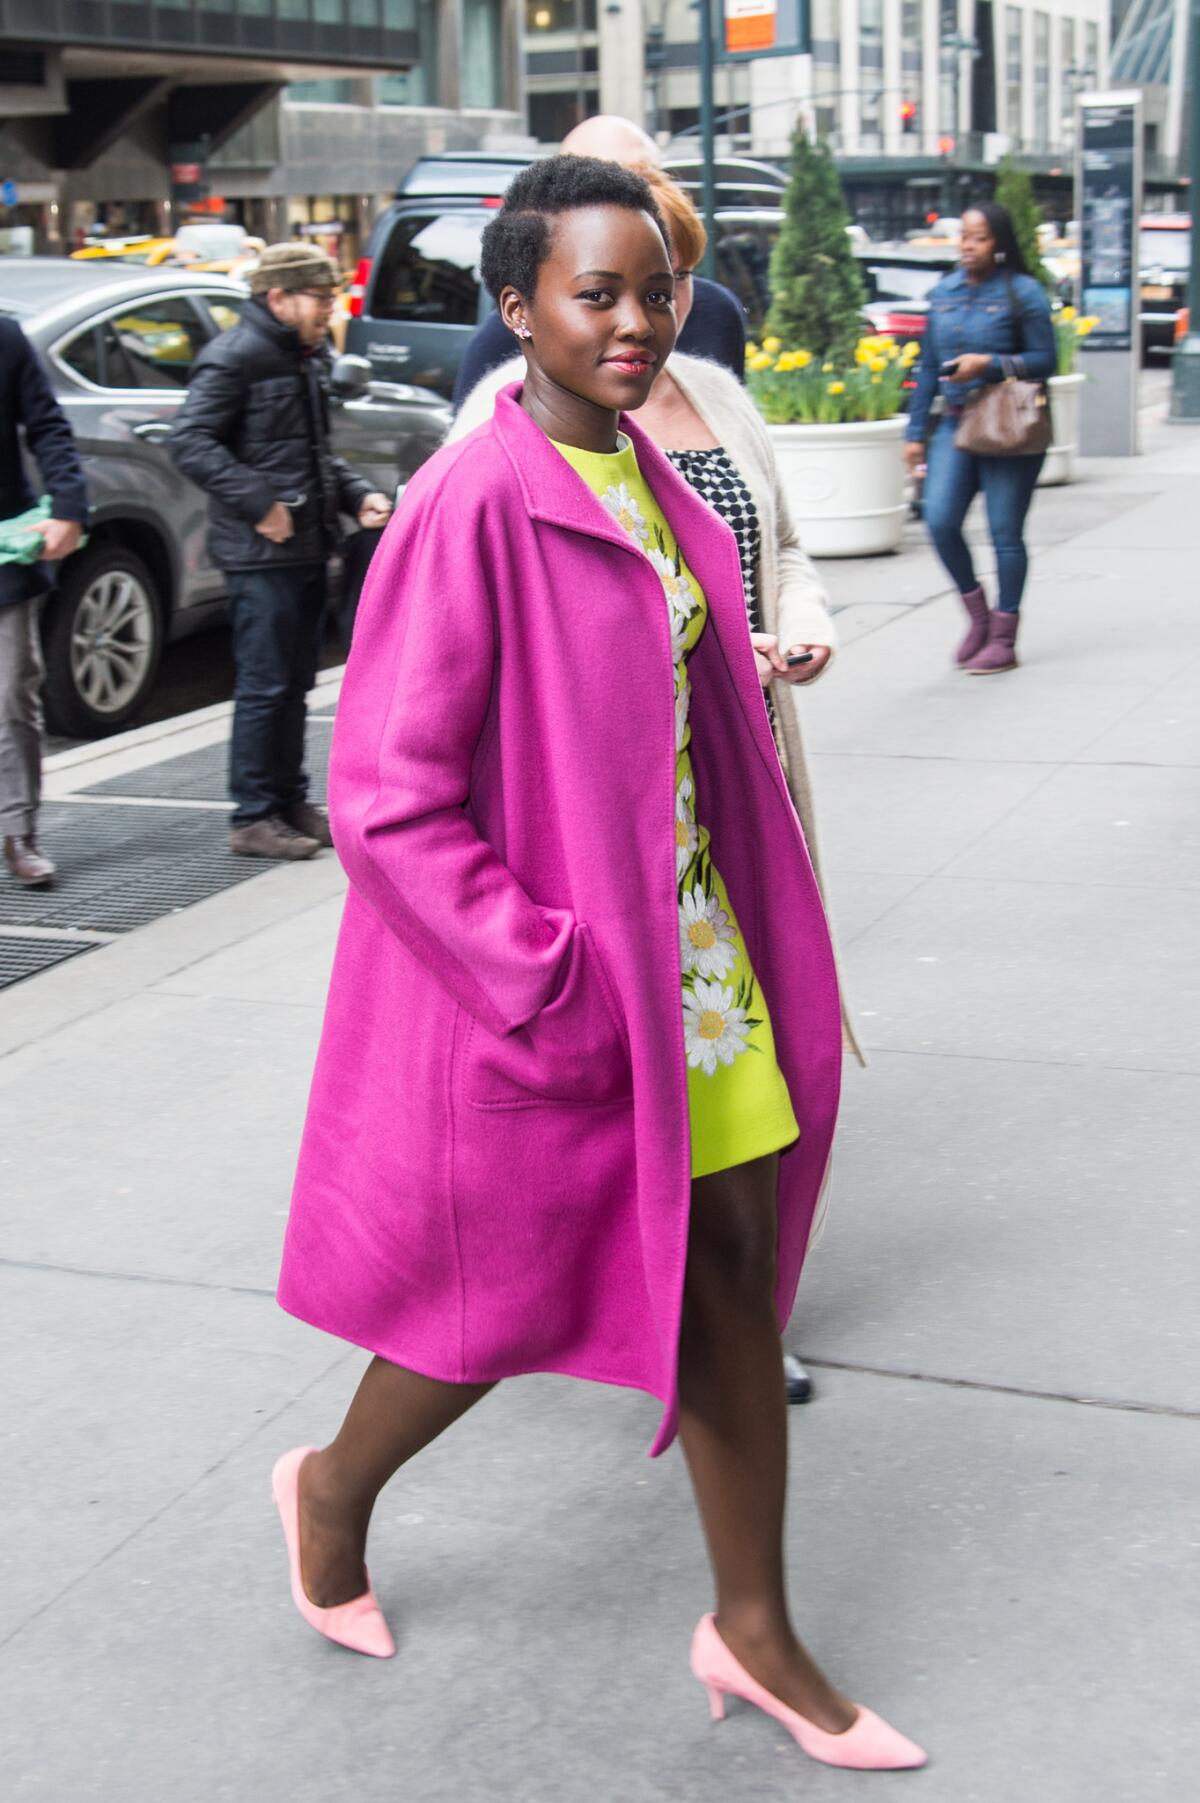 An image of actress Lupita Nyong’o wearing a Max Mara coat to Variety's Power of Women New York luncheon in April 2016 will be among those shown in the upcoming Max Mara photo exhibition.